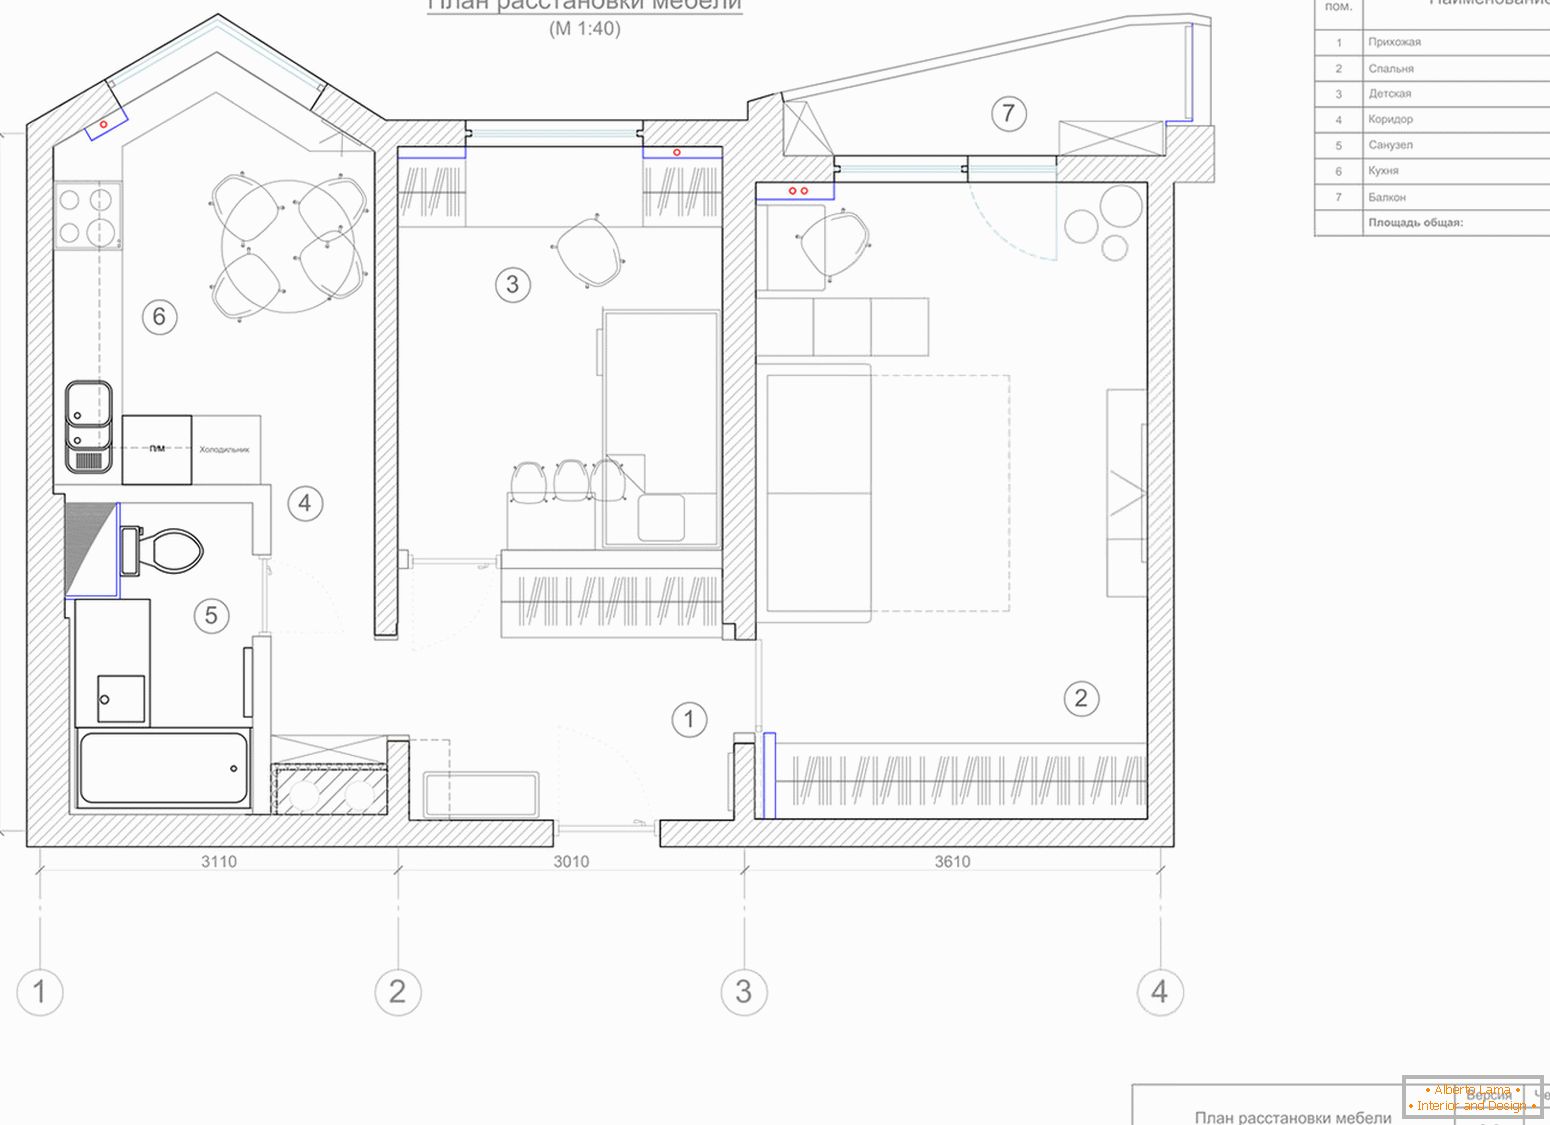 Graphic plan for arranging furniture